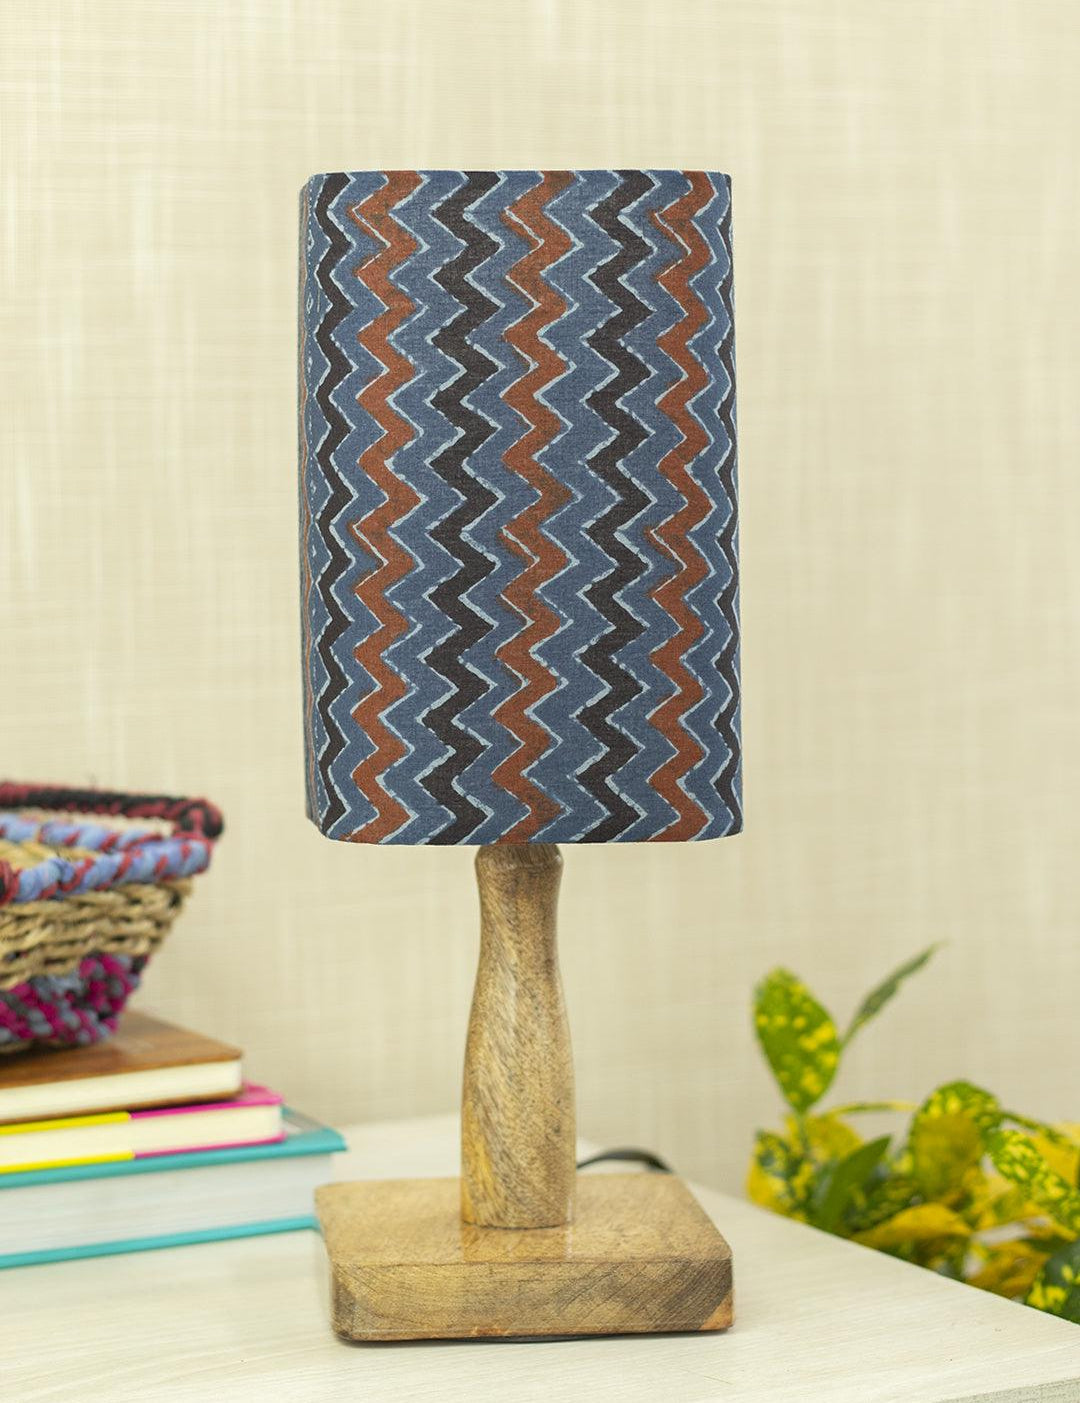 Wooden Table Lamp With Zig Zag Print Shade - MARKET 99